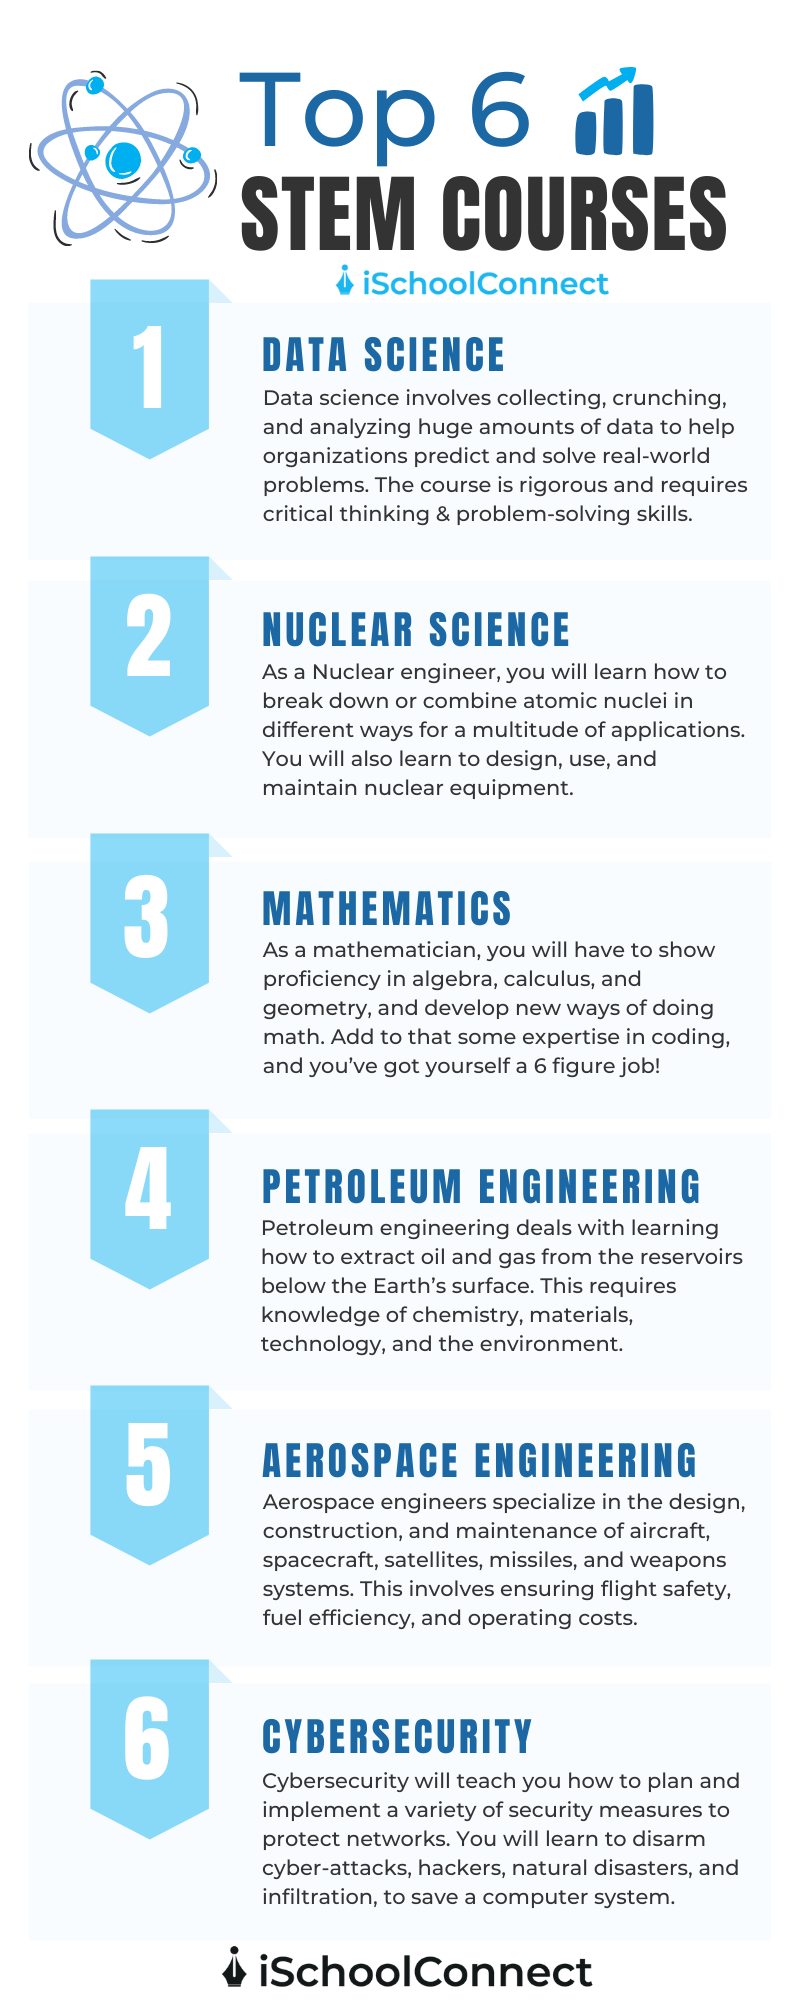 Top STEM courses of the year